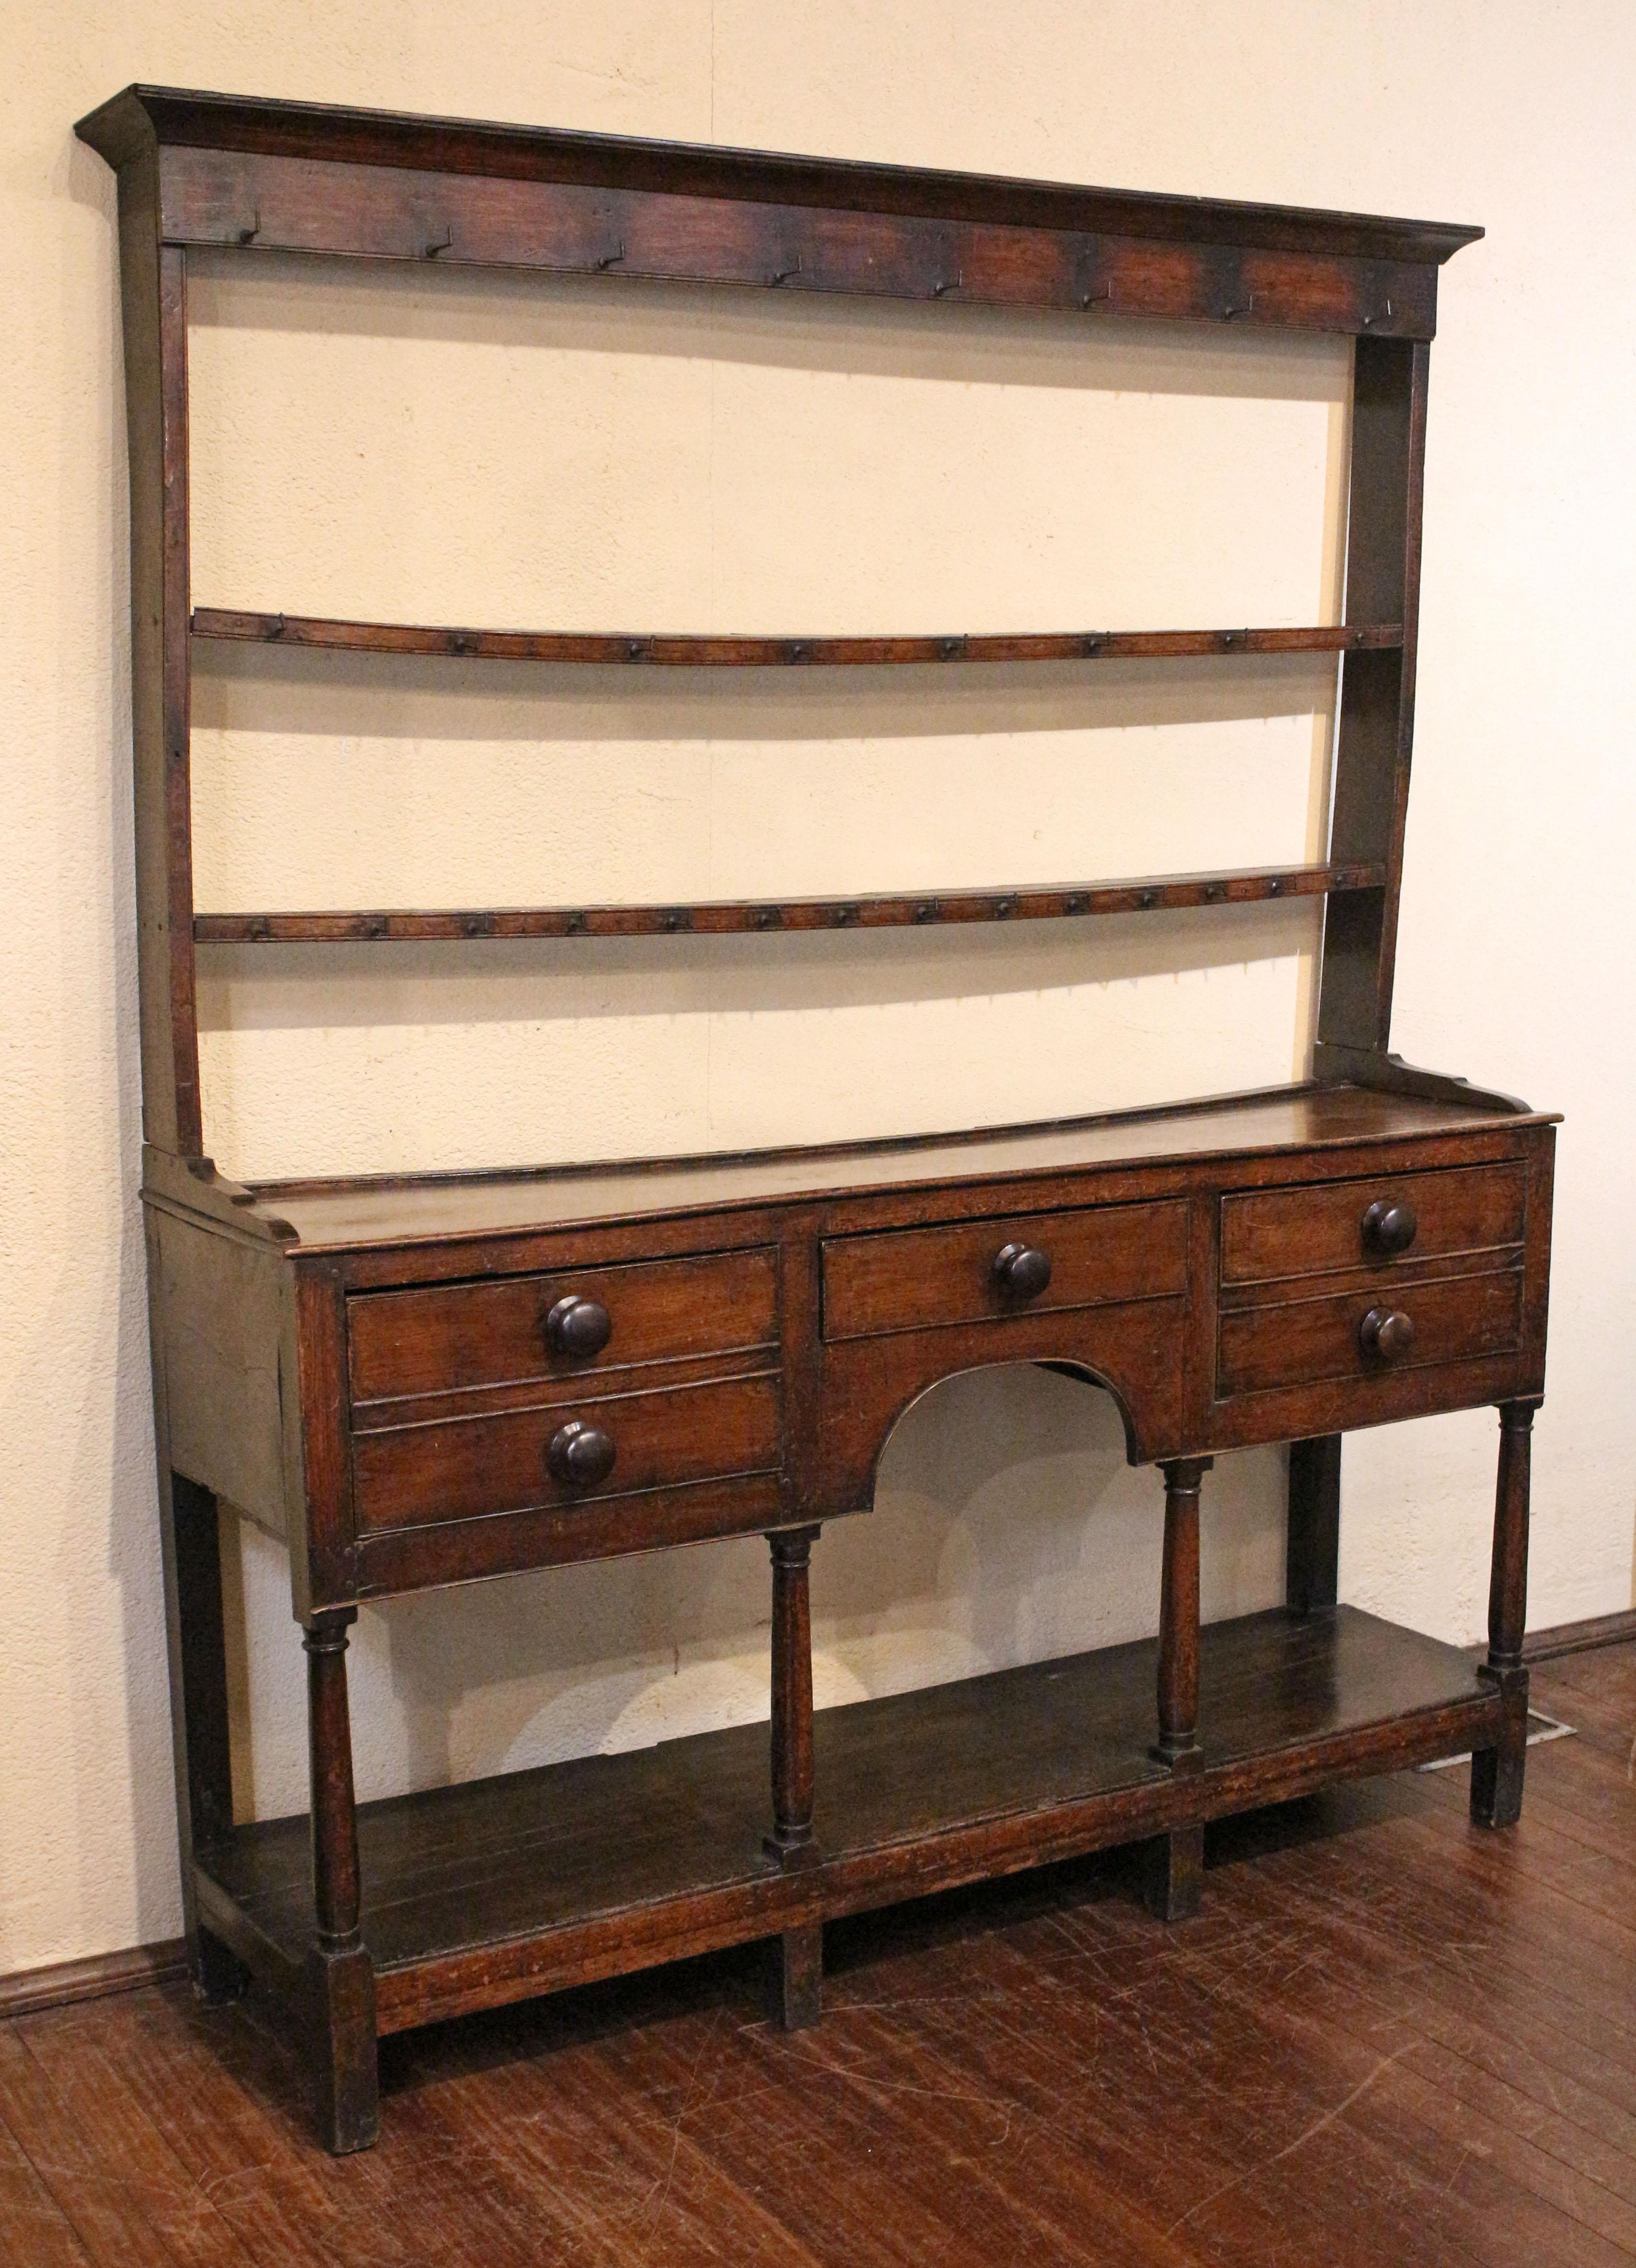 Late 18th century Welsh Dresser with pot shelf base, Wales. Elm & ash. The handsome columns are simply swell turned. Deep drawers, with double drawer faux fronts for visual design continuity, flank a single drawer over arched opening. Forged iron